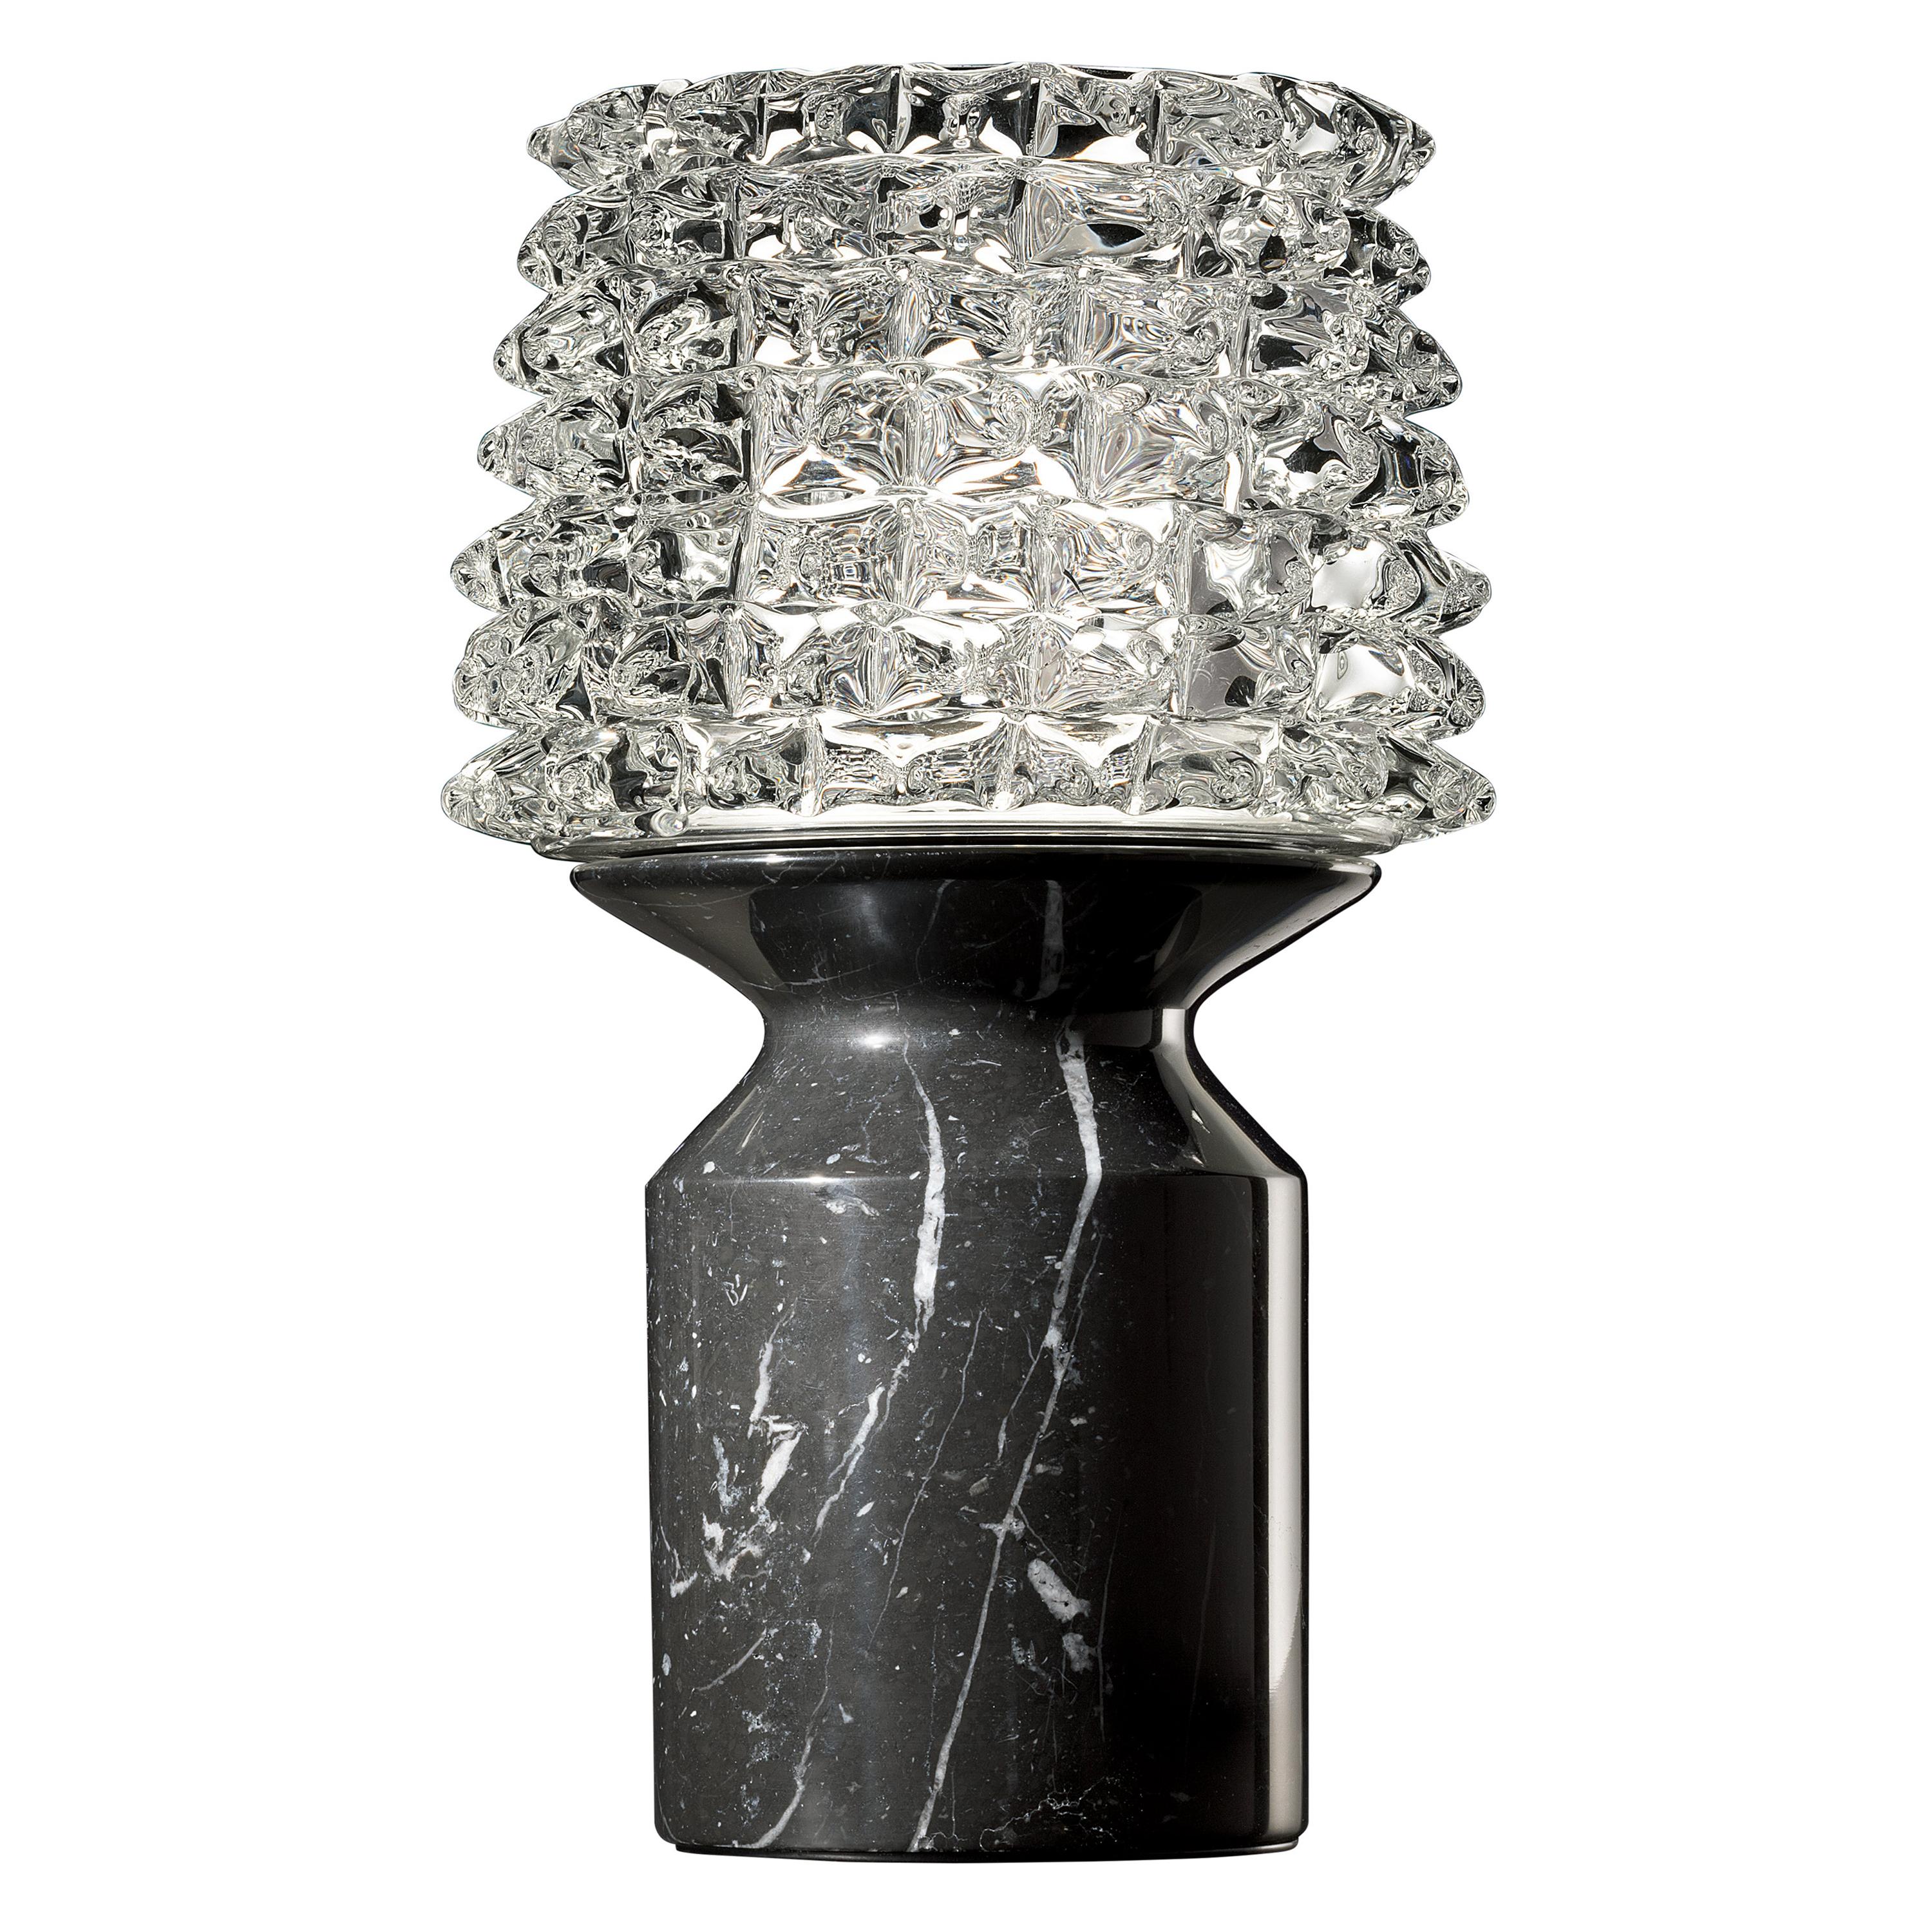 Camparino 7359 Table Lamp in Glass with Black Marble Finish, by Barovier&Toso